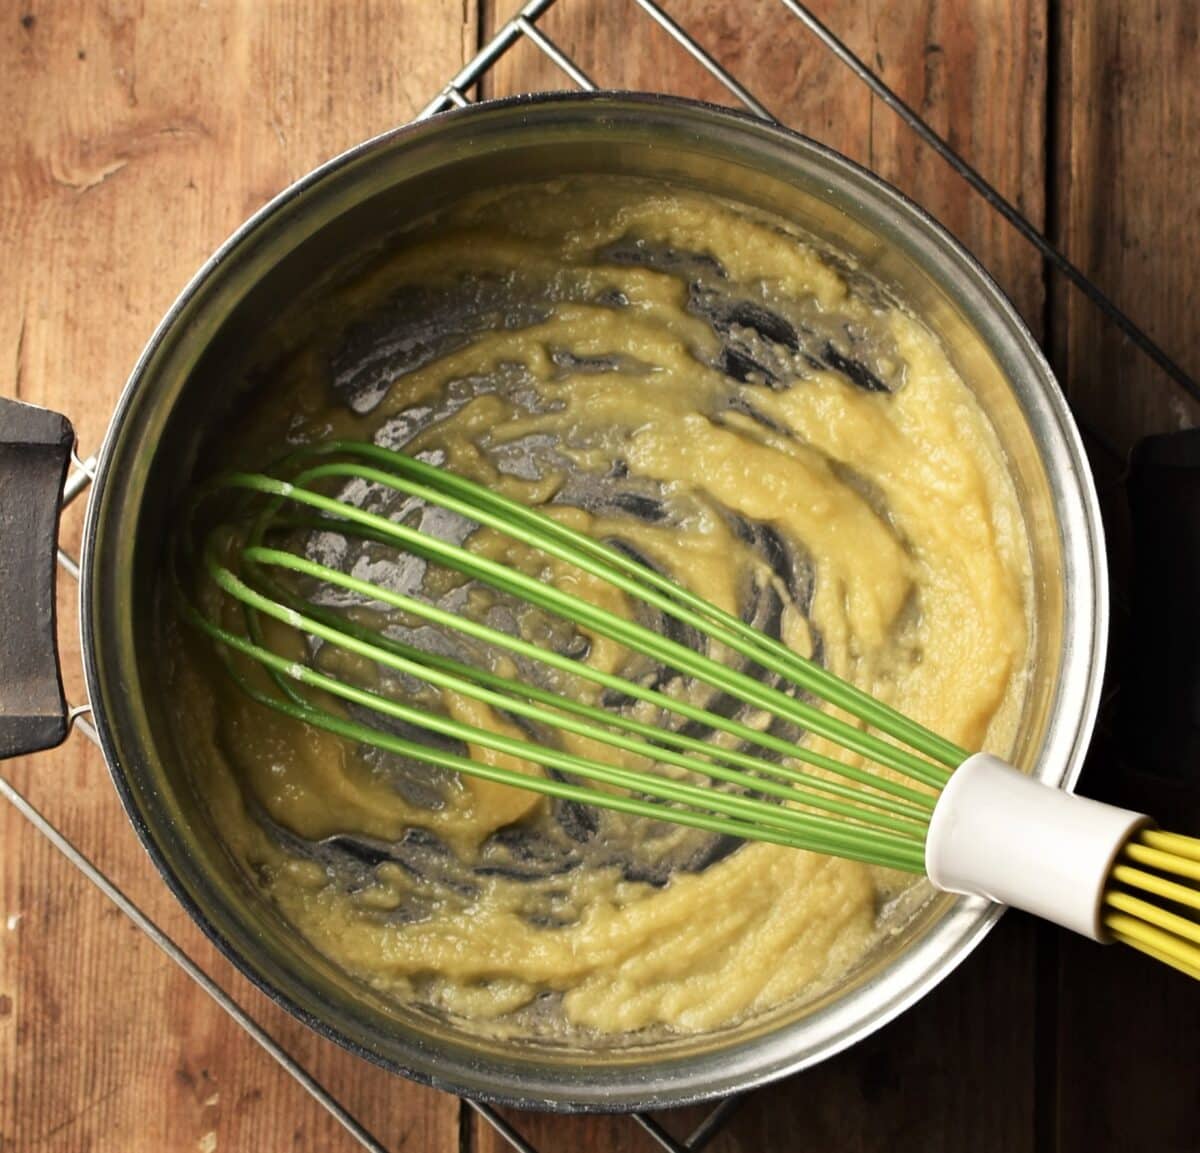 Roux in saucepan with green whisk.